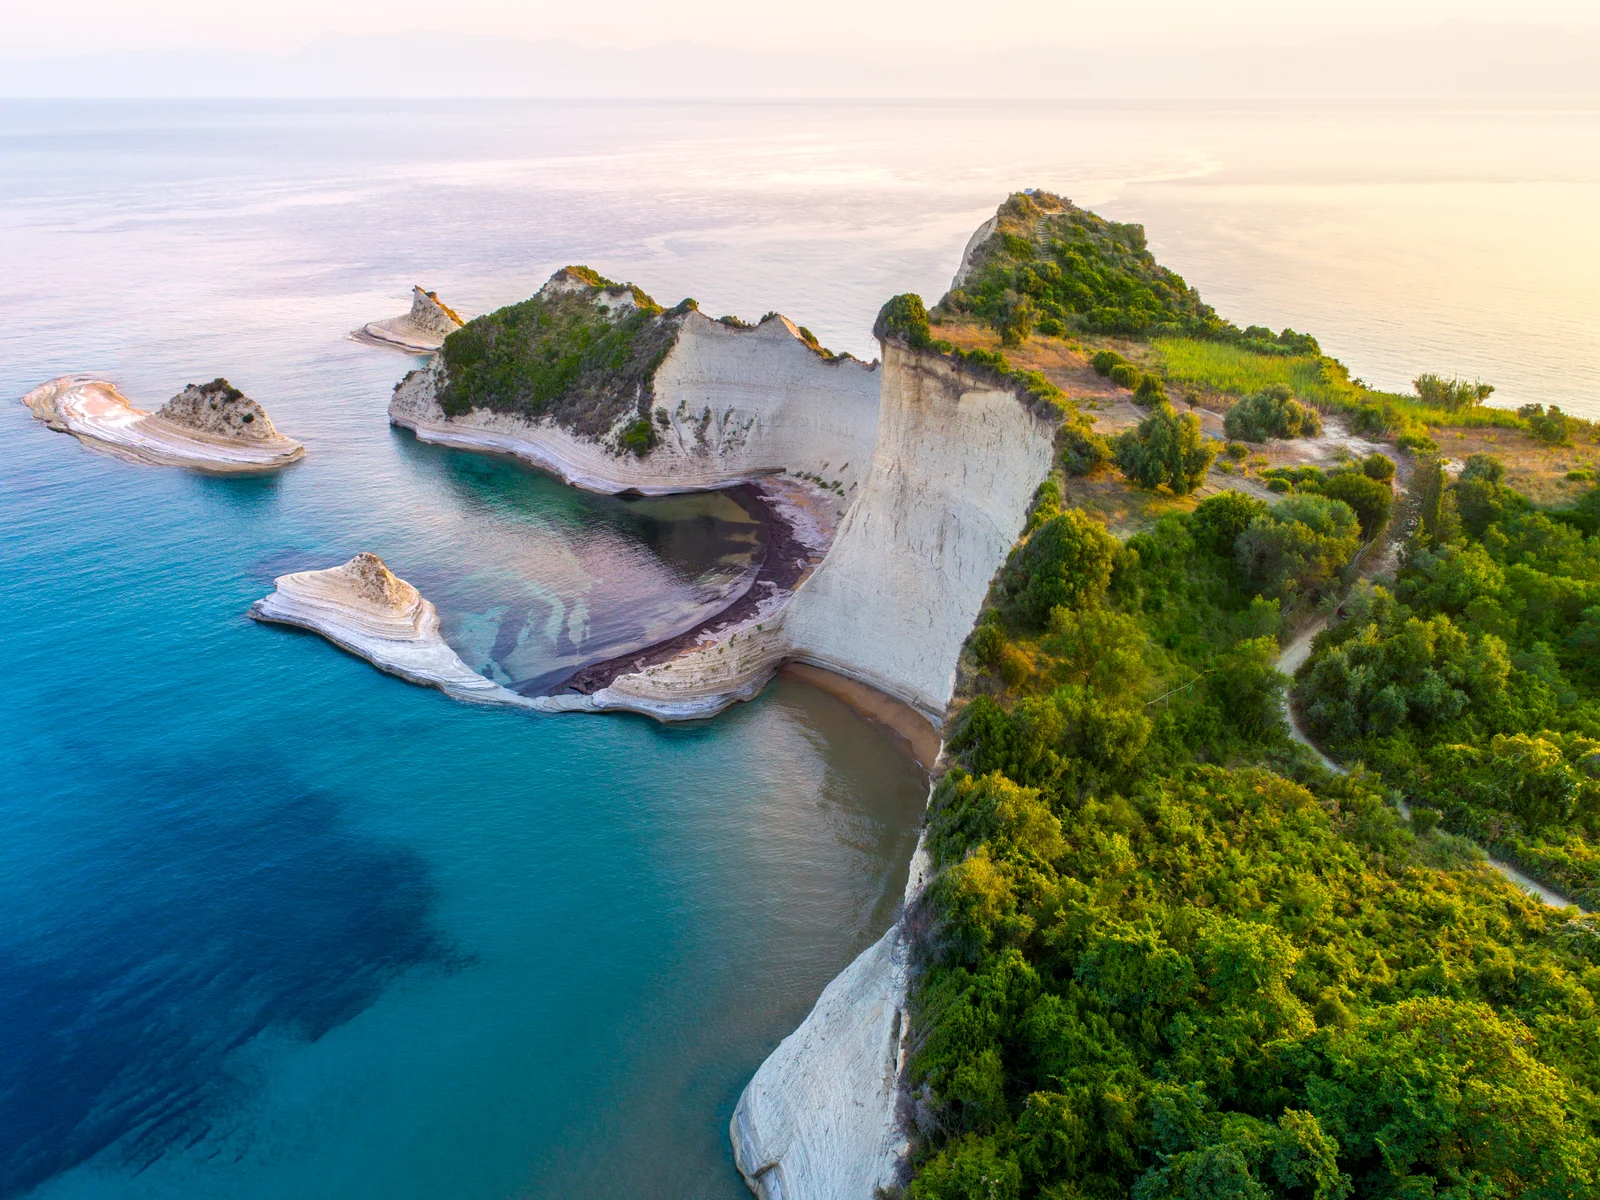 Aerial view on the white cliffs at Cape Drastis in the island of Corfu as one of the best islands in Greece to visit, with lush greeneries at the top and calm clear sea at the bottom